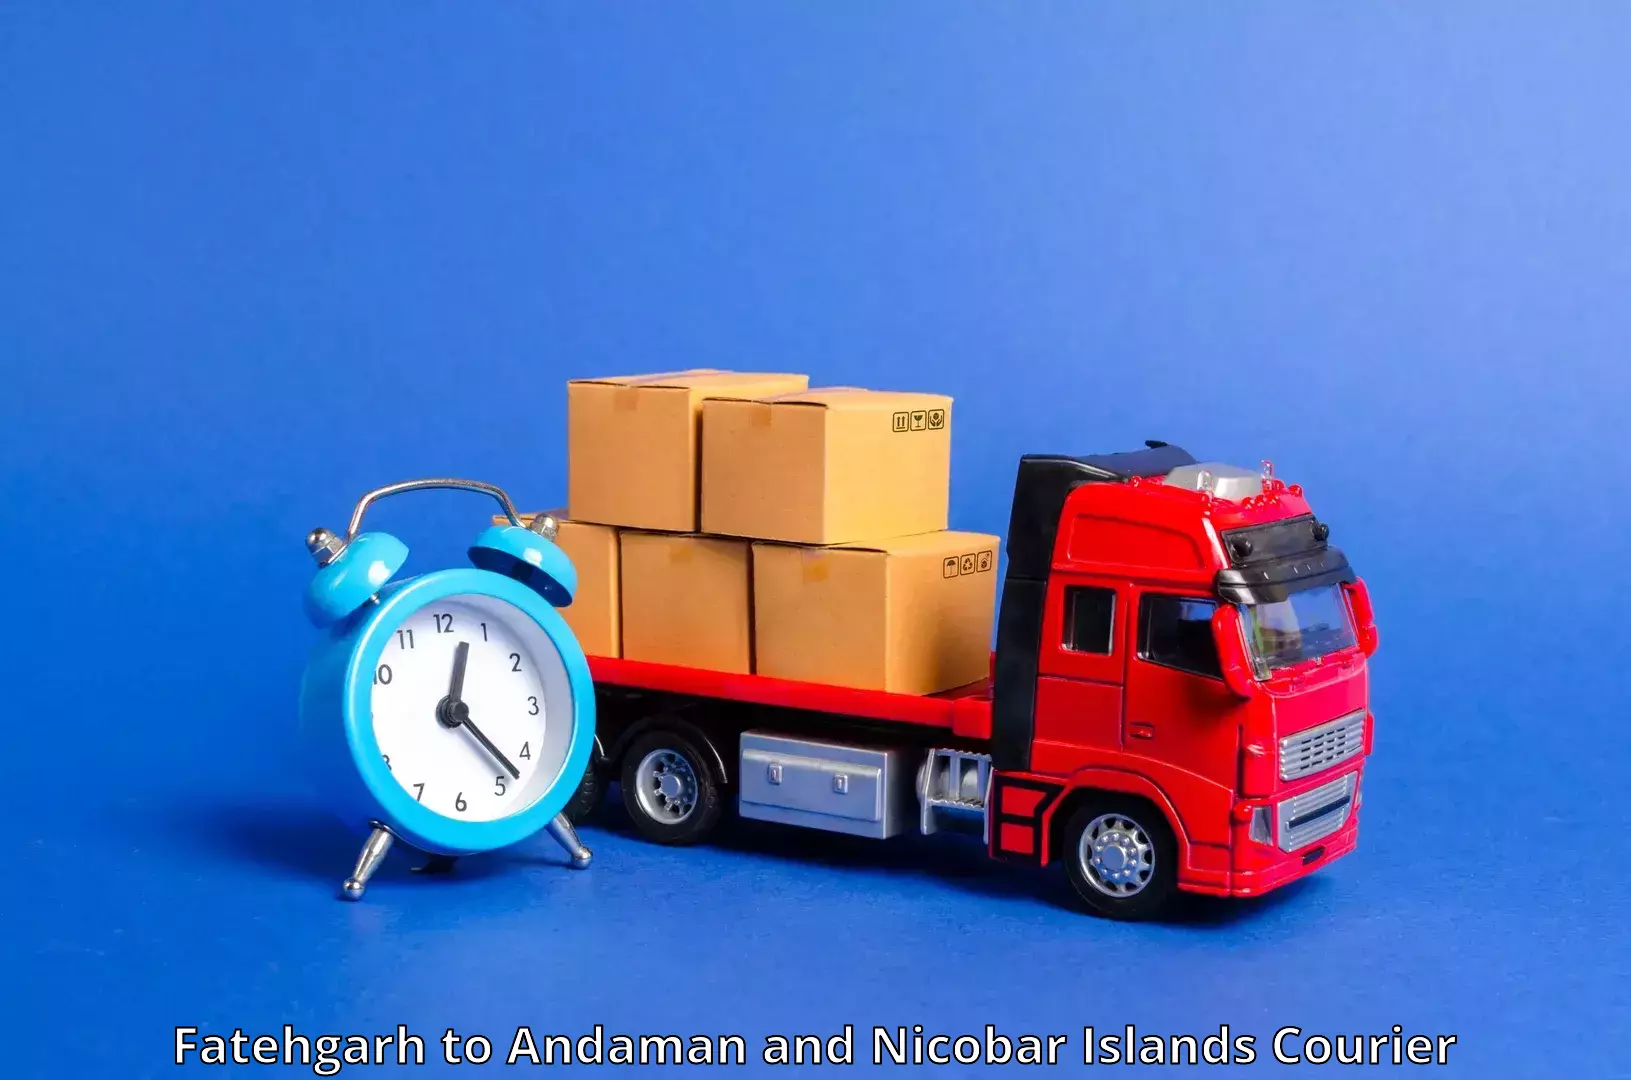 Courier service comparison Fatehgarh to Andaman and Nicobar Islands